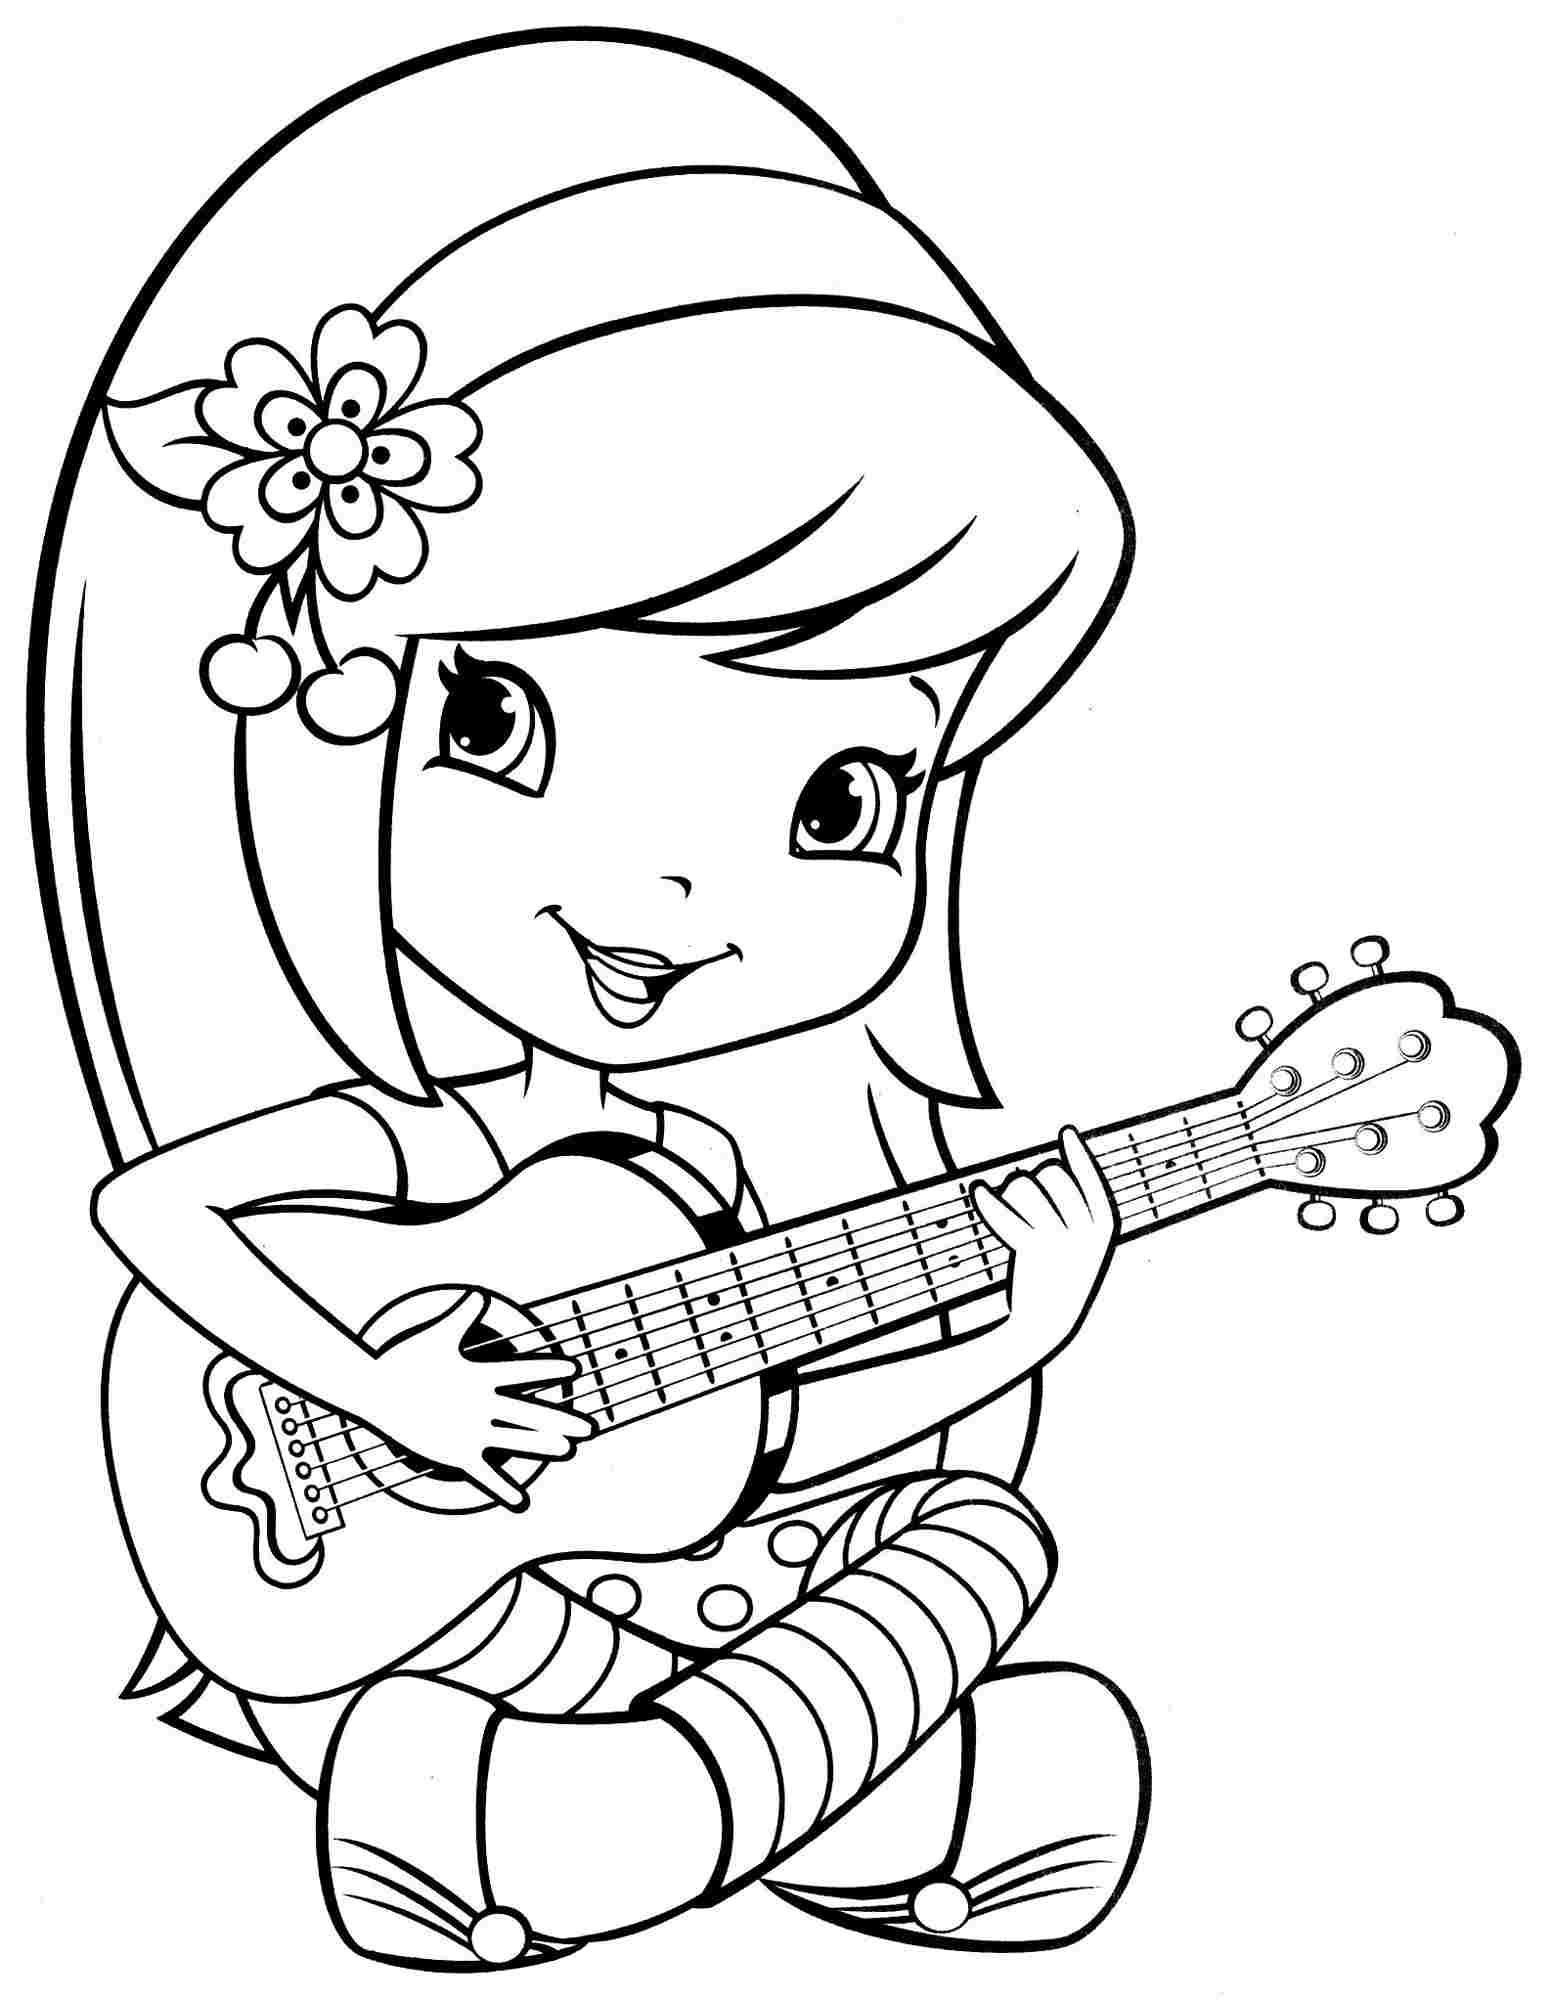 Girl Cartoon Coloring Pages
 Free Printable Free Cartoon Strawberry Shortcake Cherry